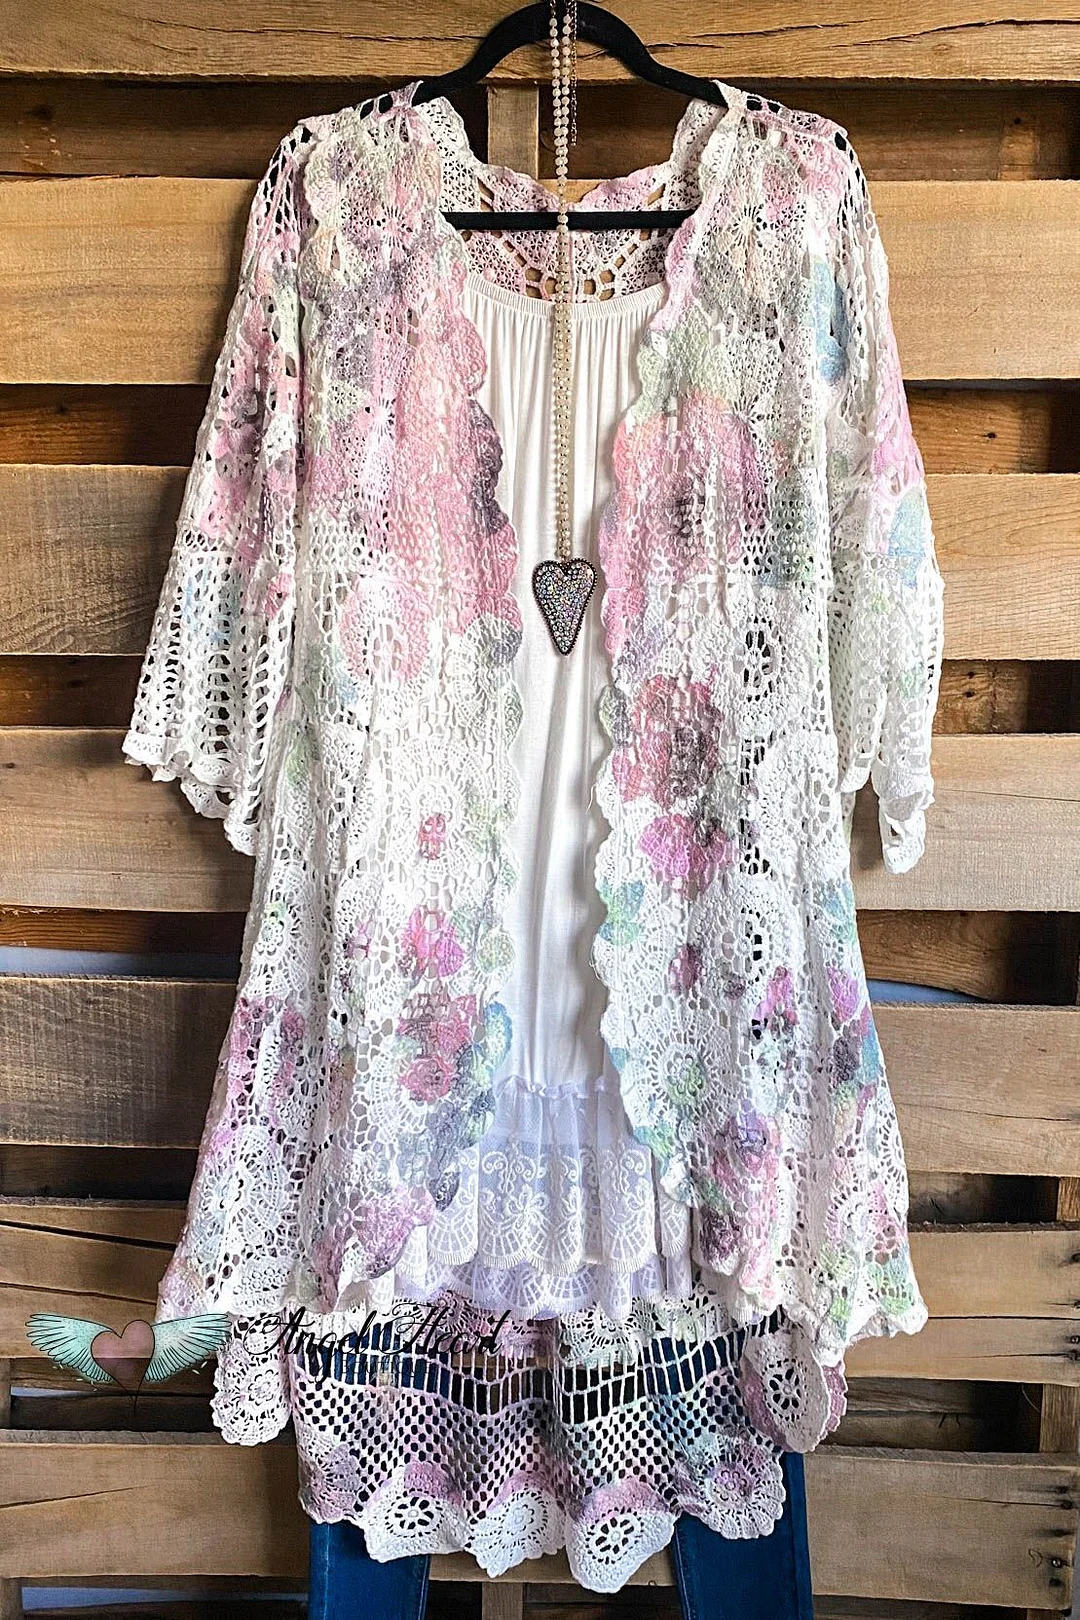 Women's Plus Size Jacket Lace Trims Print Floral Outdoor Causal 3/4 Length Sleeve